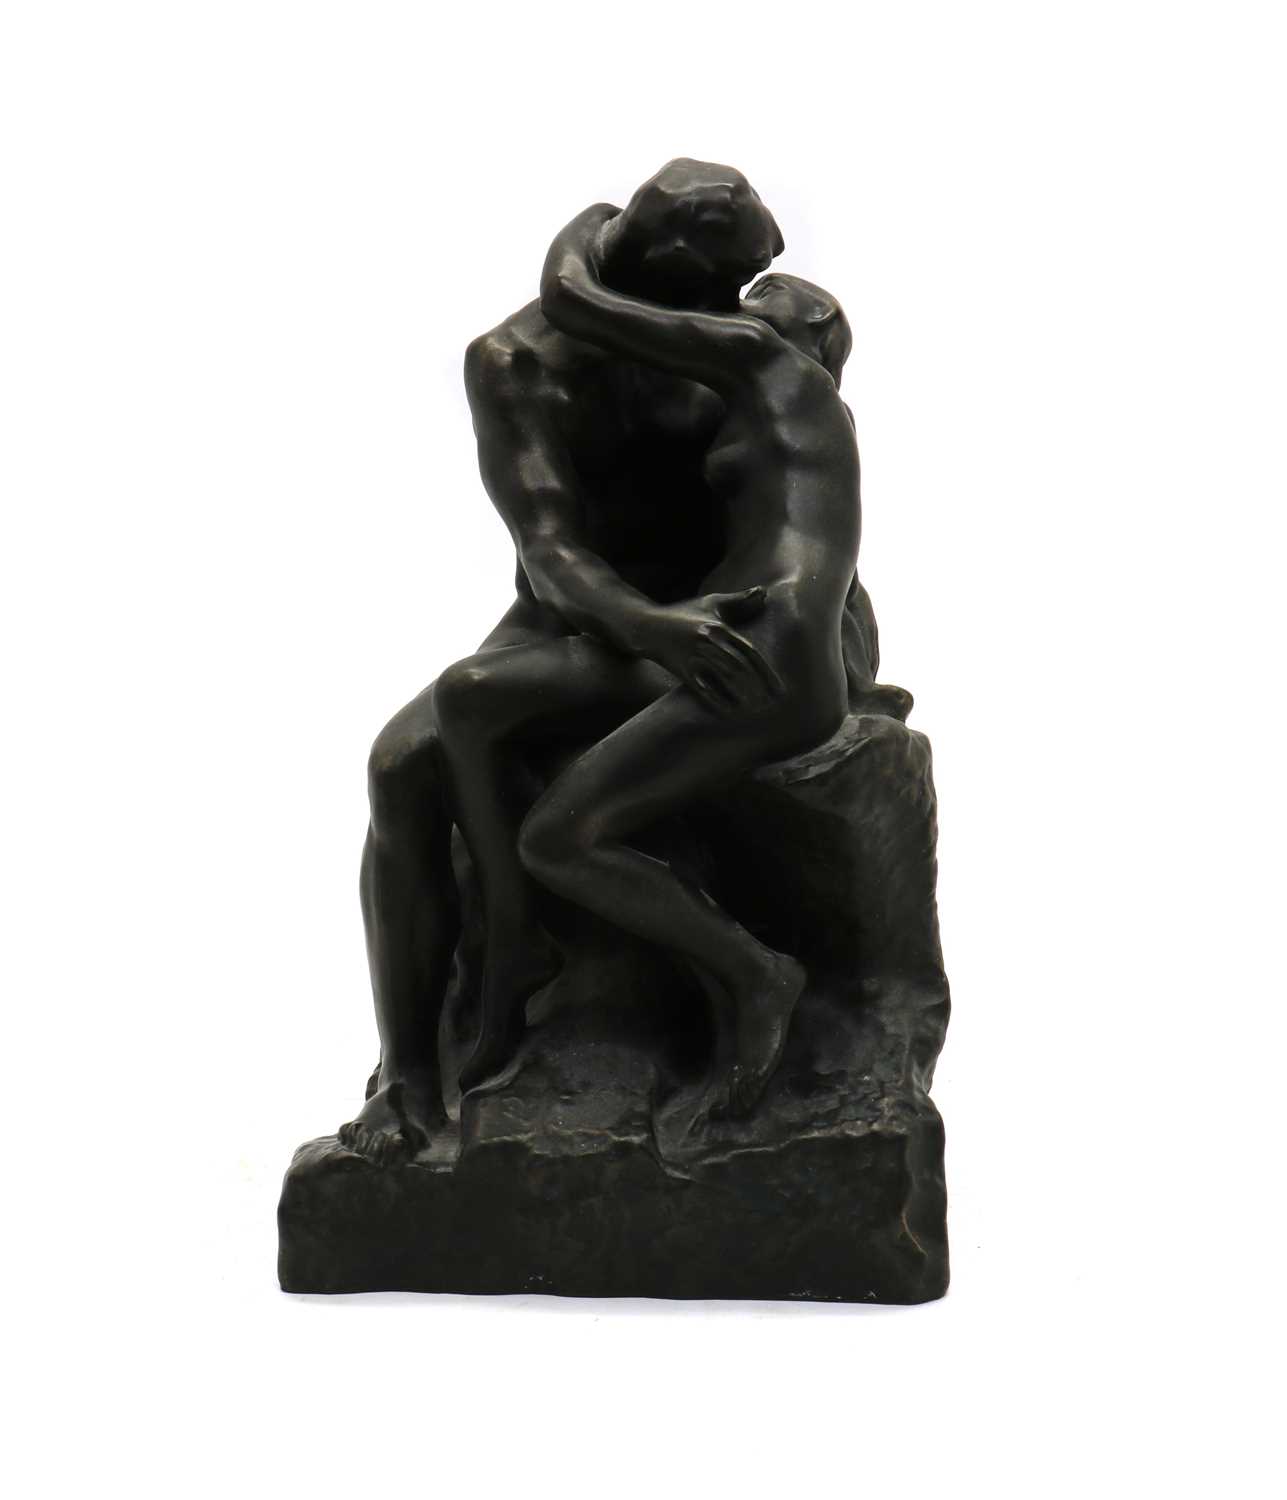 Lot 137 - After Auguste Rodin (French, 1840-1917)